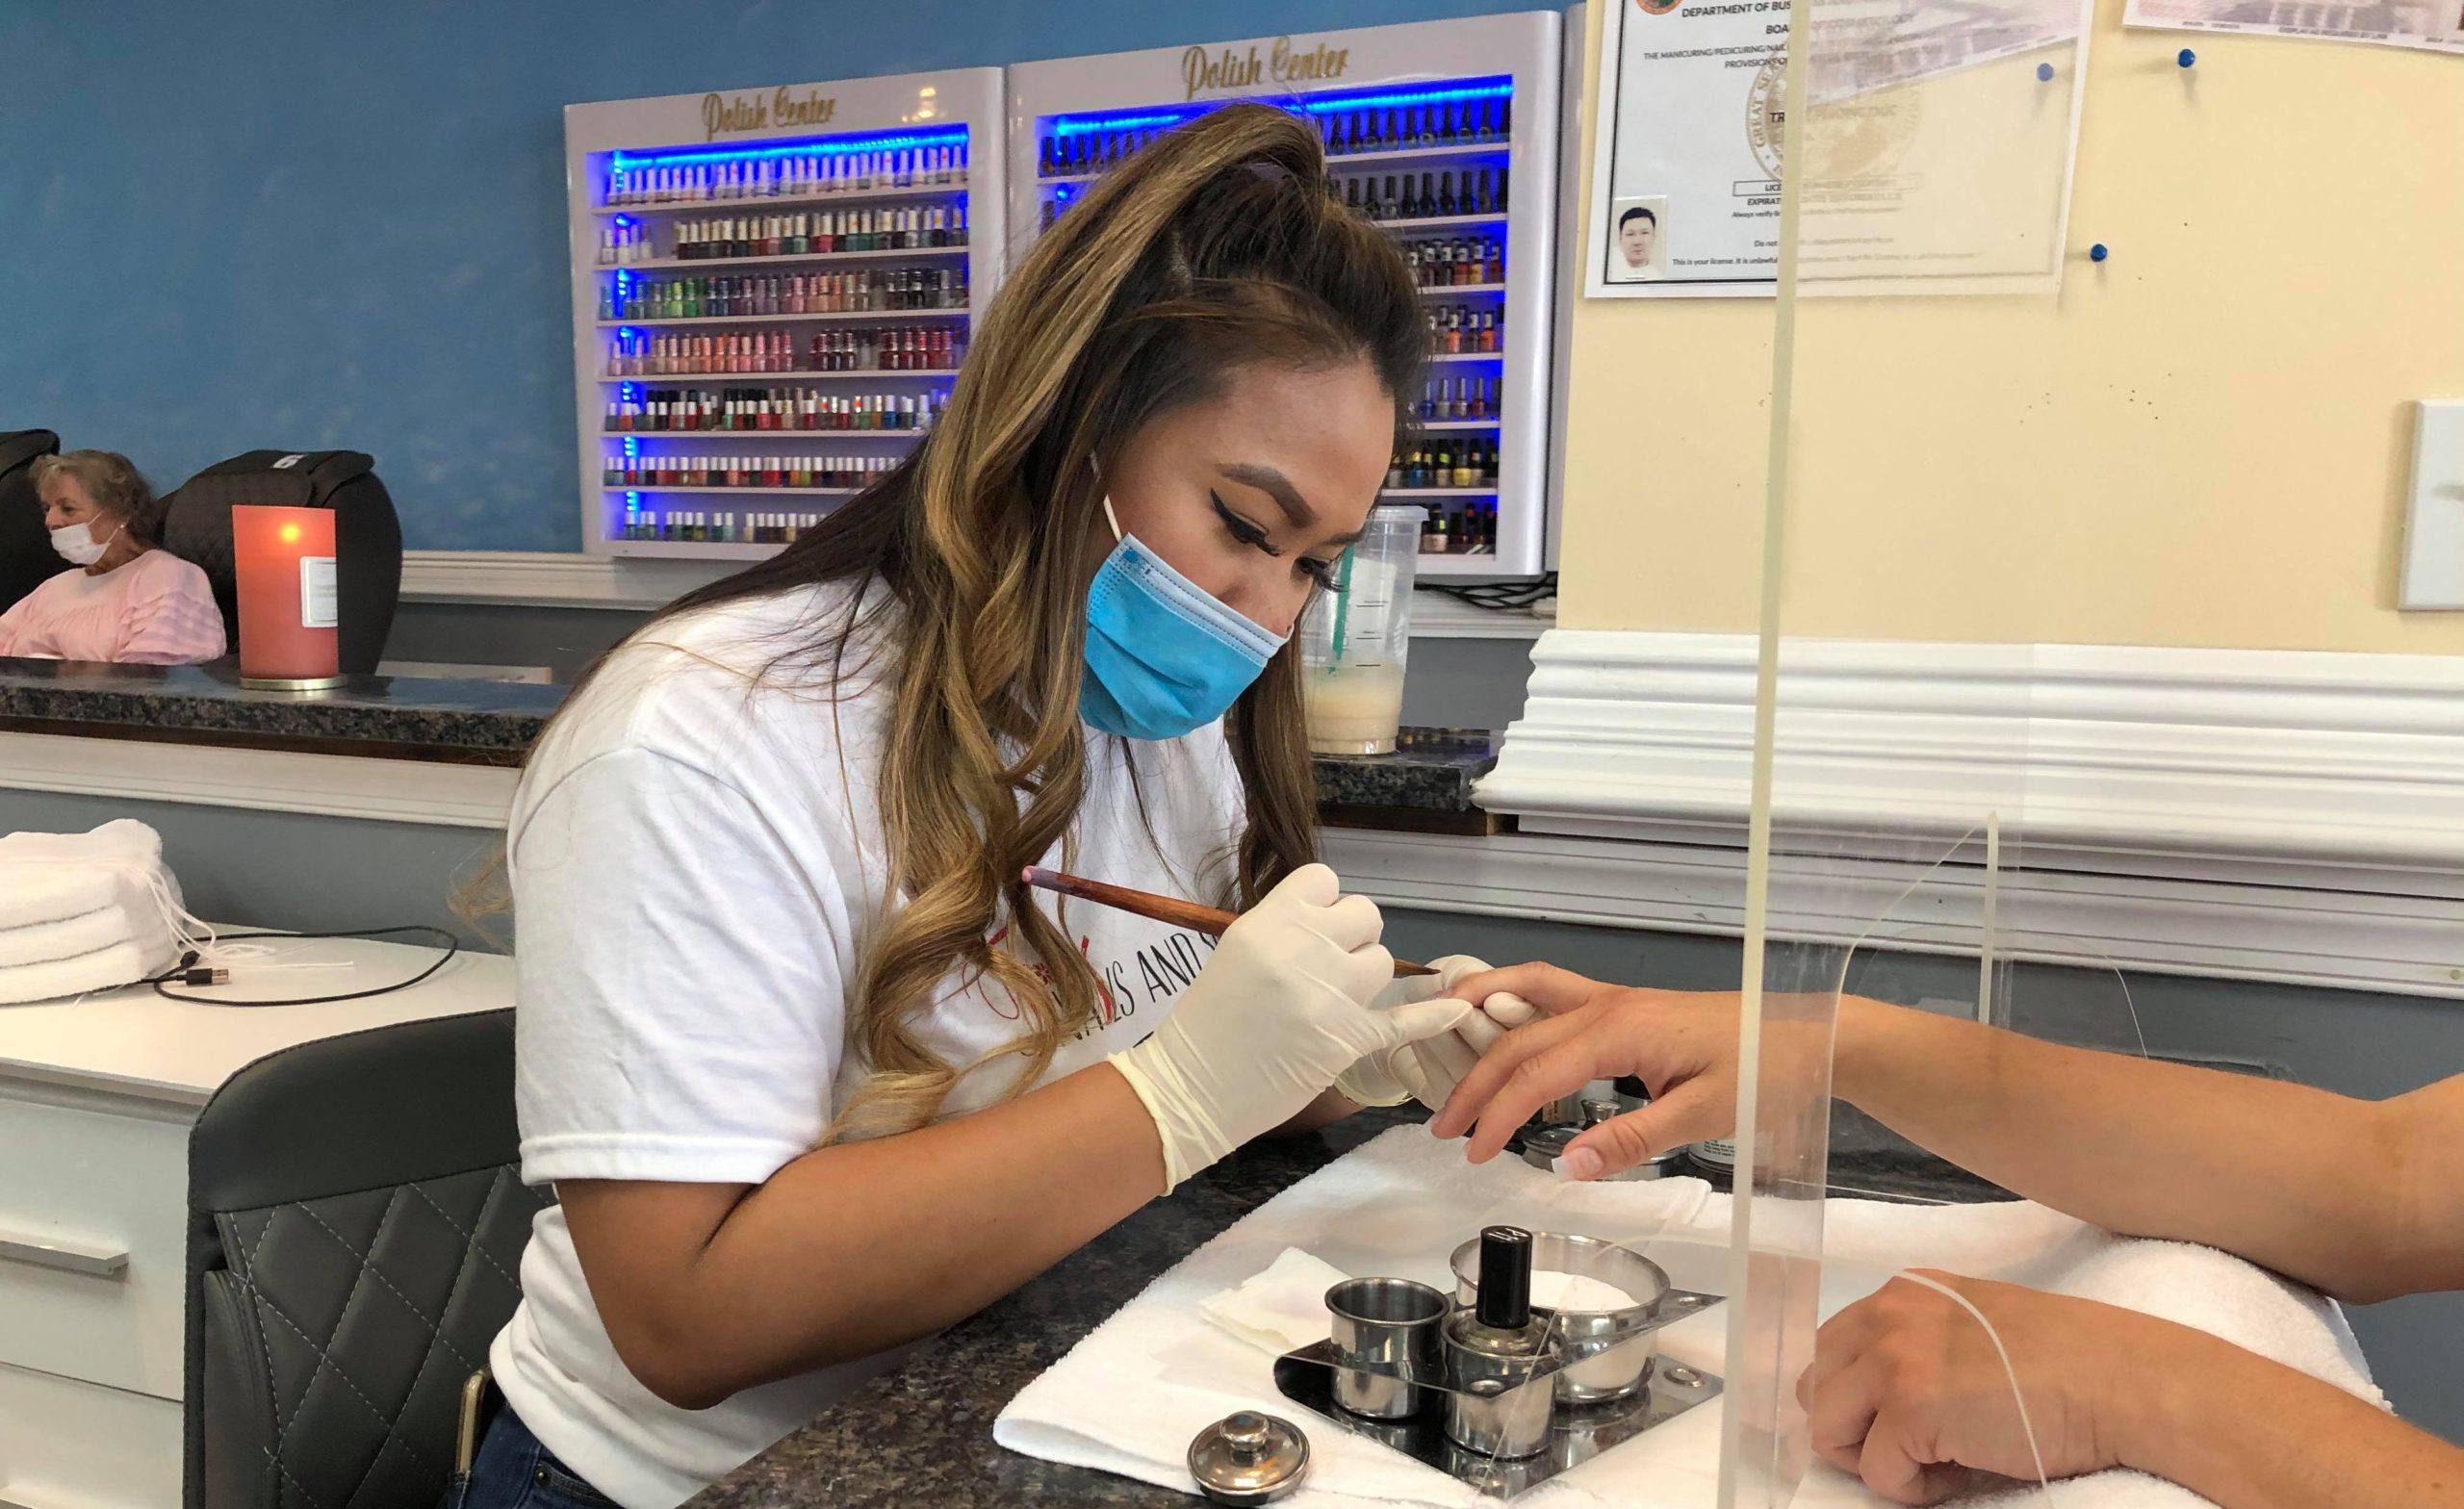 Customers mask up, get polished as salons reopen - Vero News